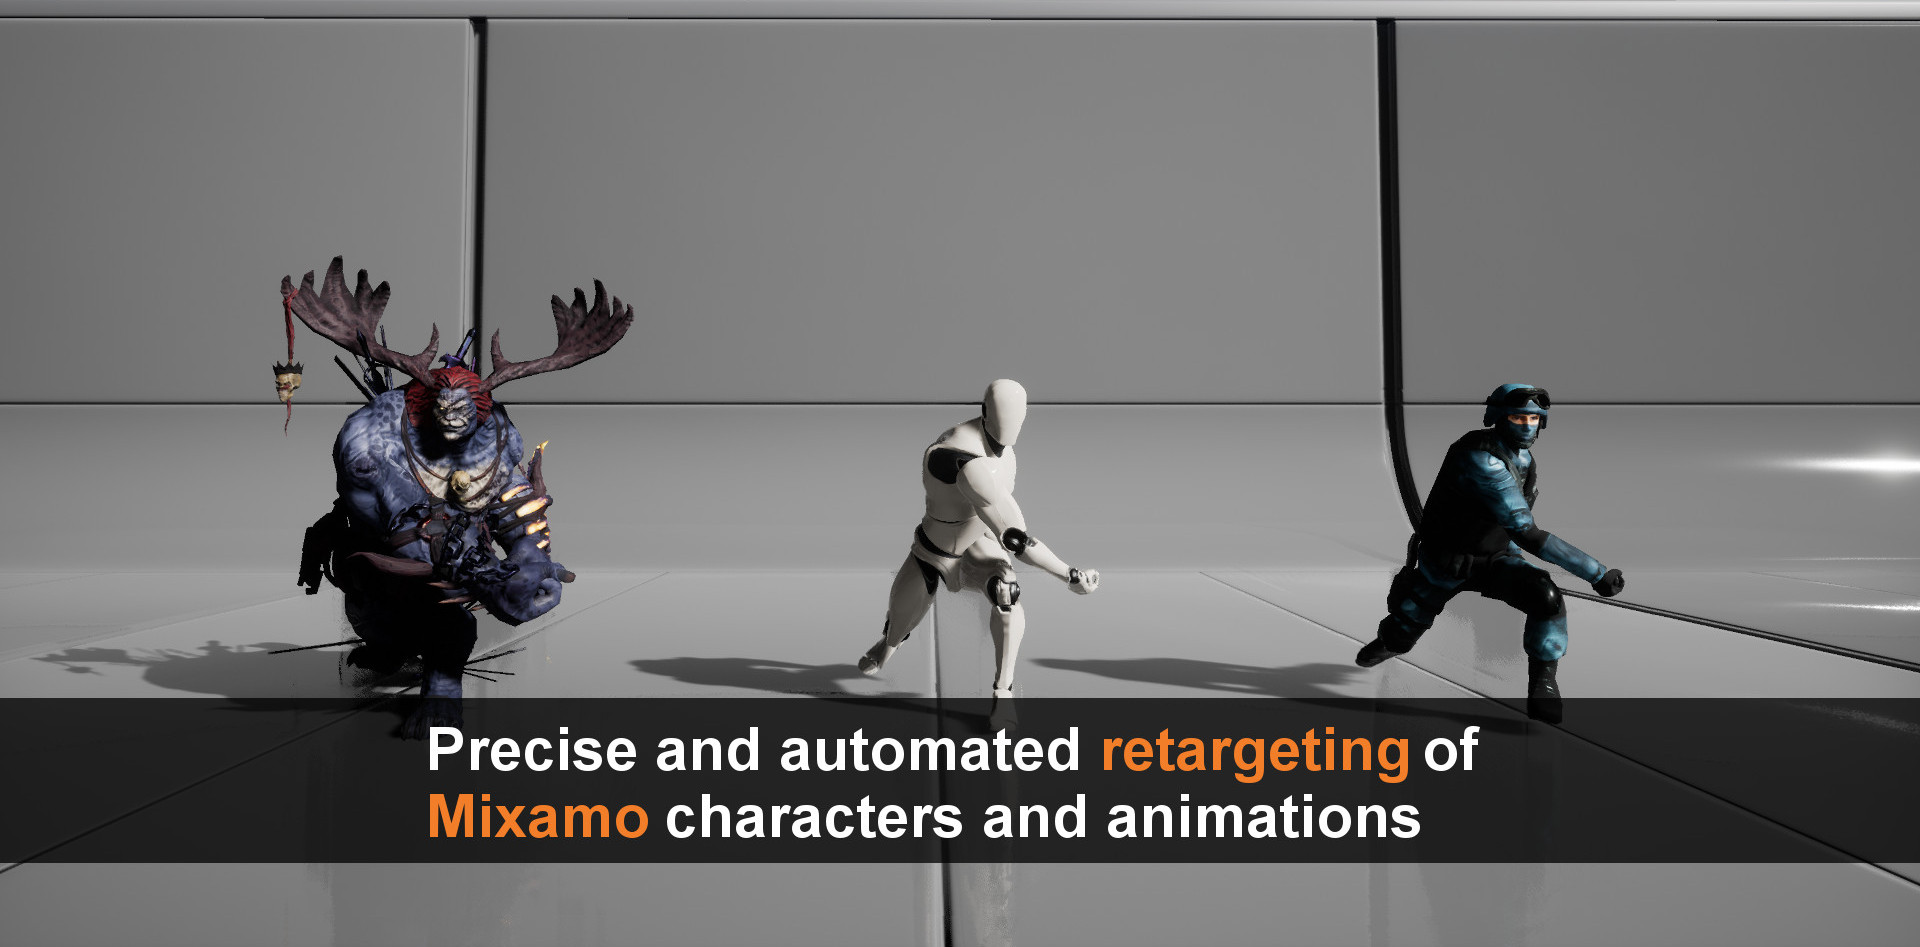 Precise and automatic retargeting of Mixamo animations and characters in Unreal Engine 4